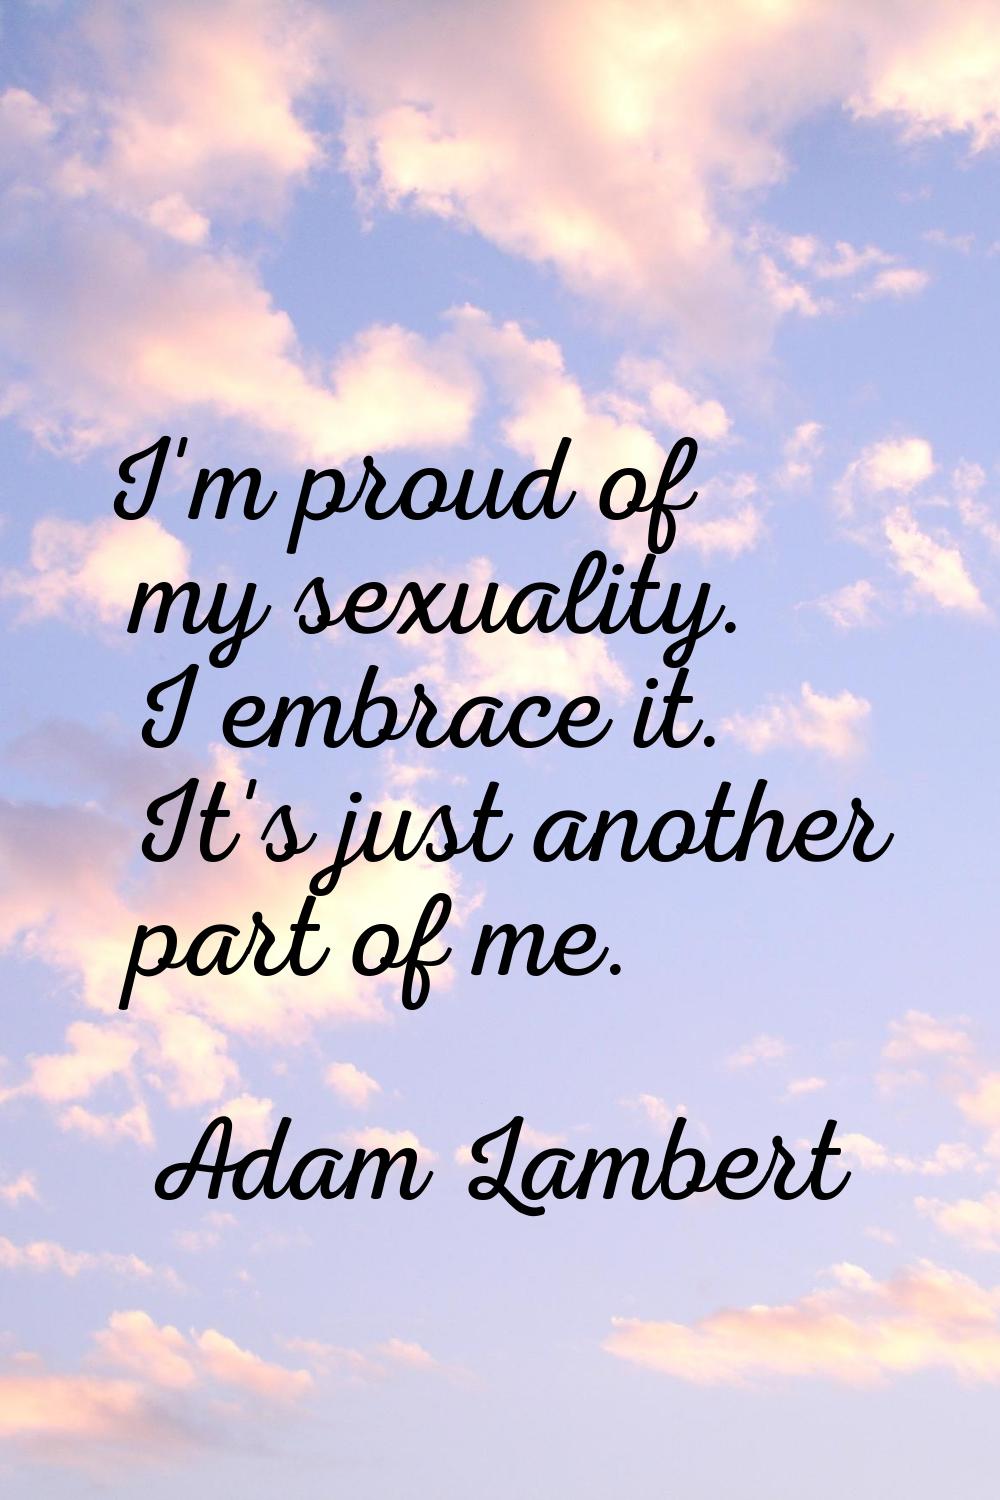 I'm proud of my sexuality. I embrace it. It's just another part of me.